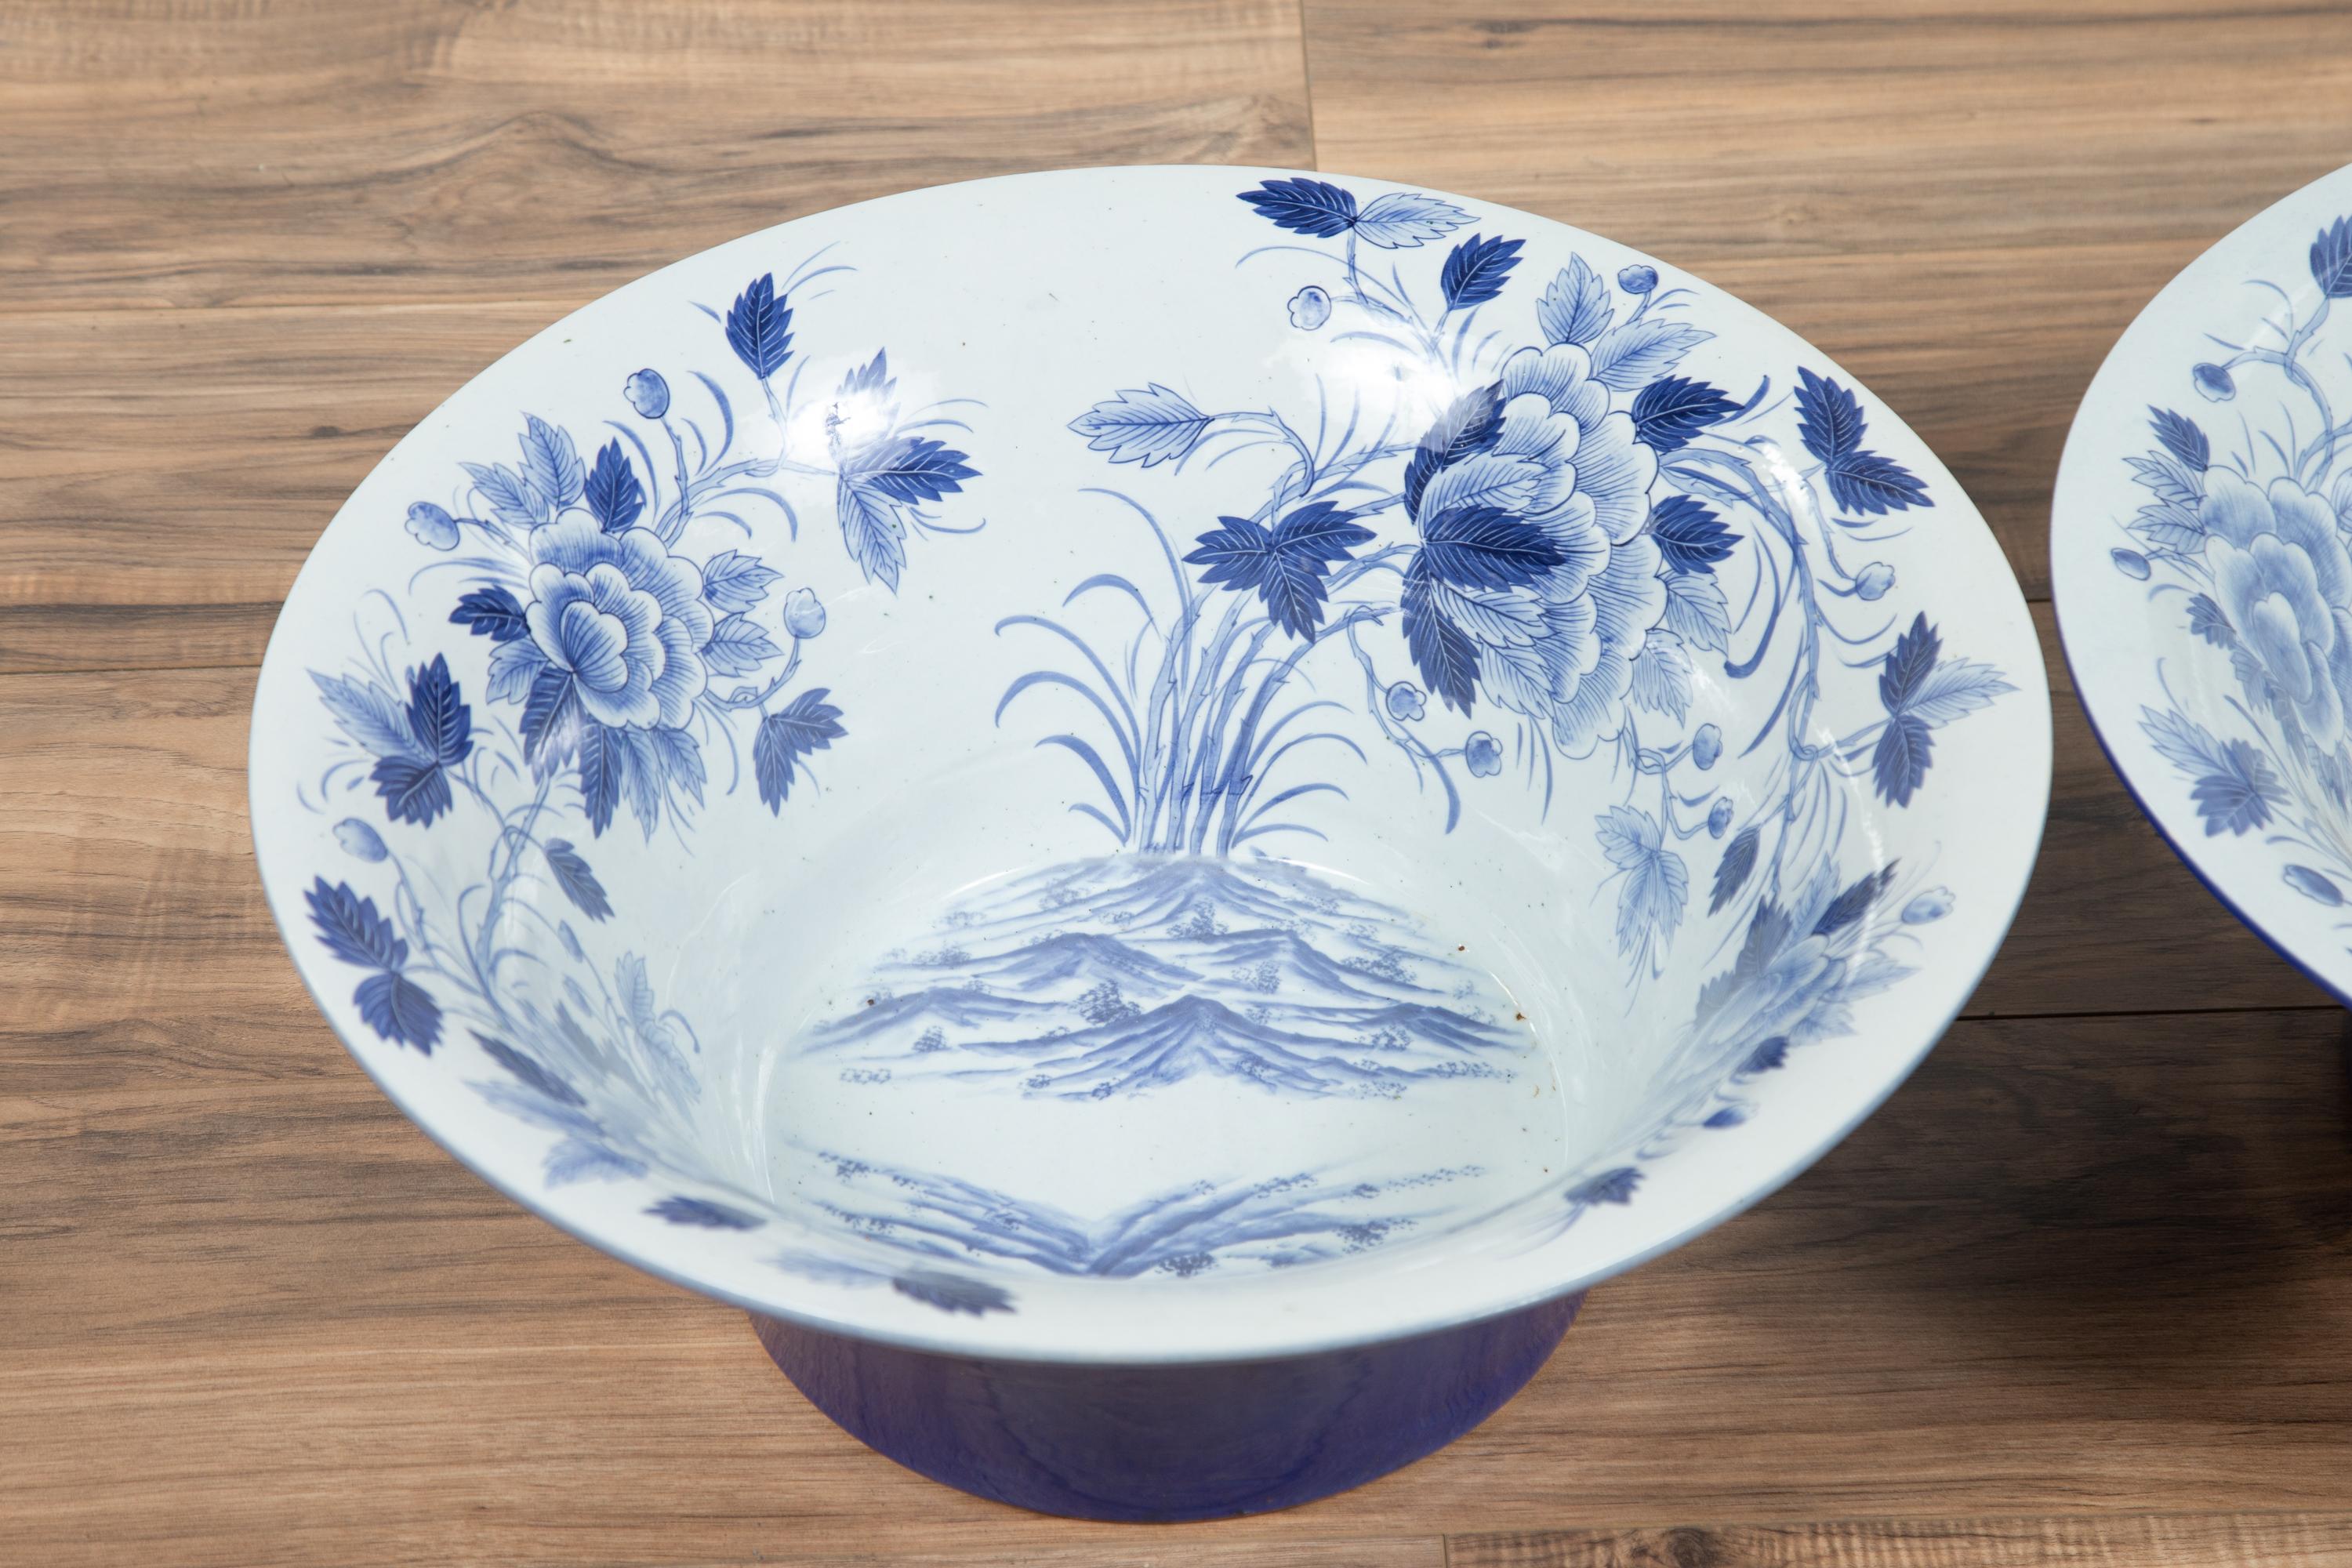 Blue and White Porcelain Wash Basin with Cobalt Blue Patina and Floral Motifs For Sale 2